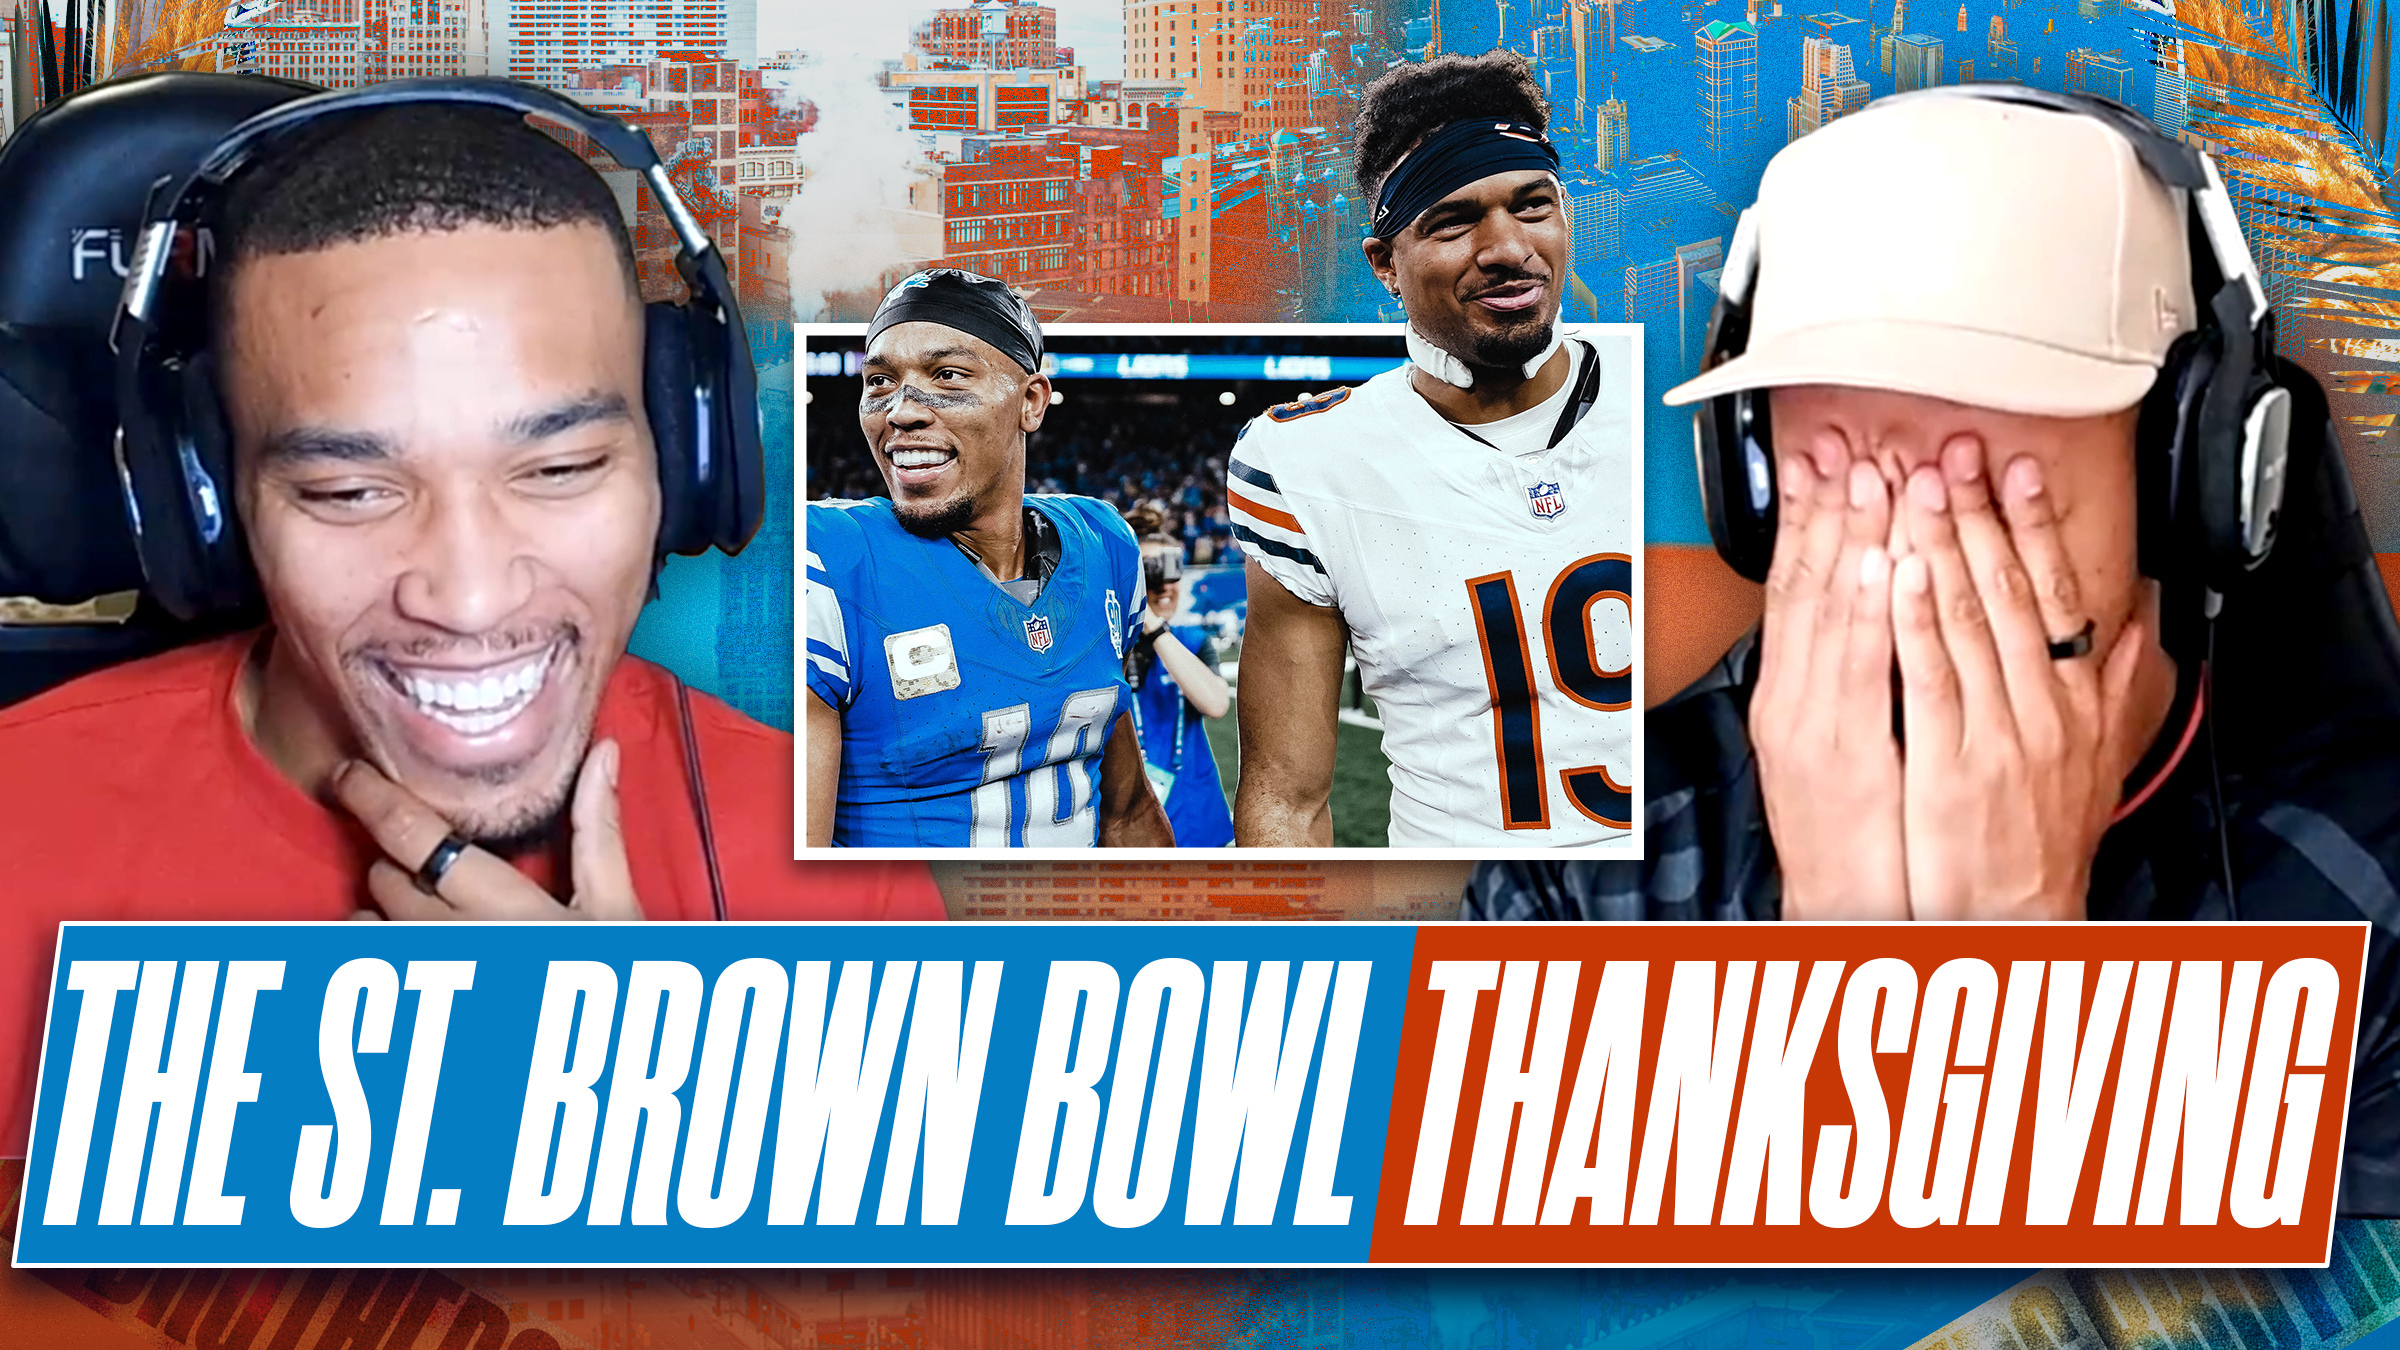 Screen grab of St. Brown Bros podcast with Amon-Ra St. Brown on the left and Equinameous St. Brown on the right, with a photo of the two in their most recent game in the middle. Text at the bottom reads: "The St. Brown Bowl" on a blue background and "Thanksgiving" on an orange background